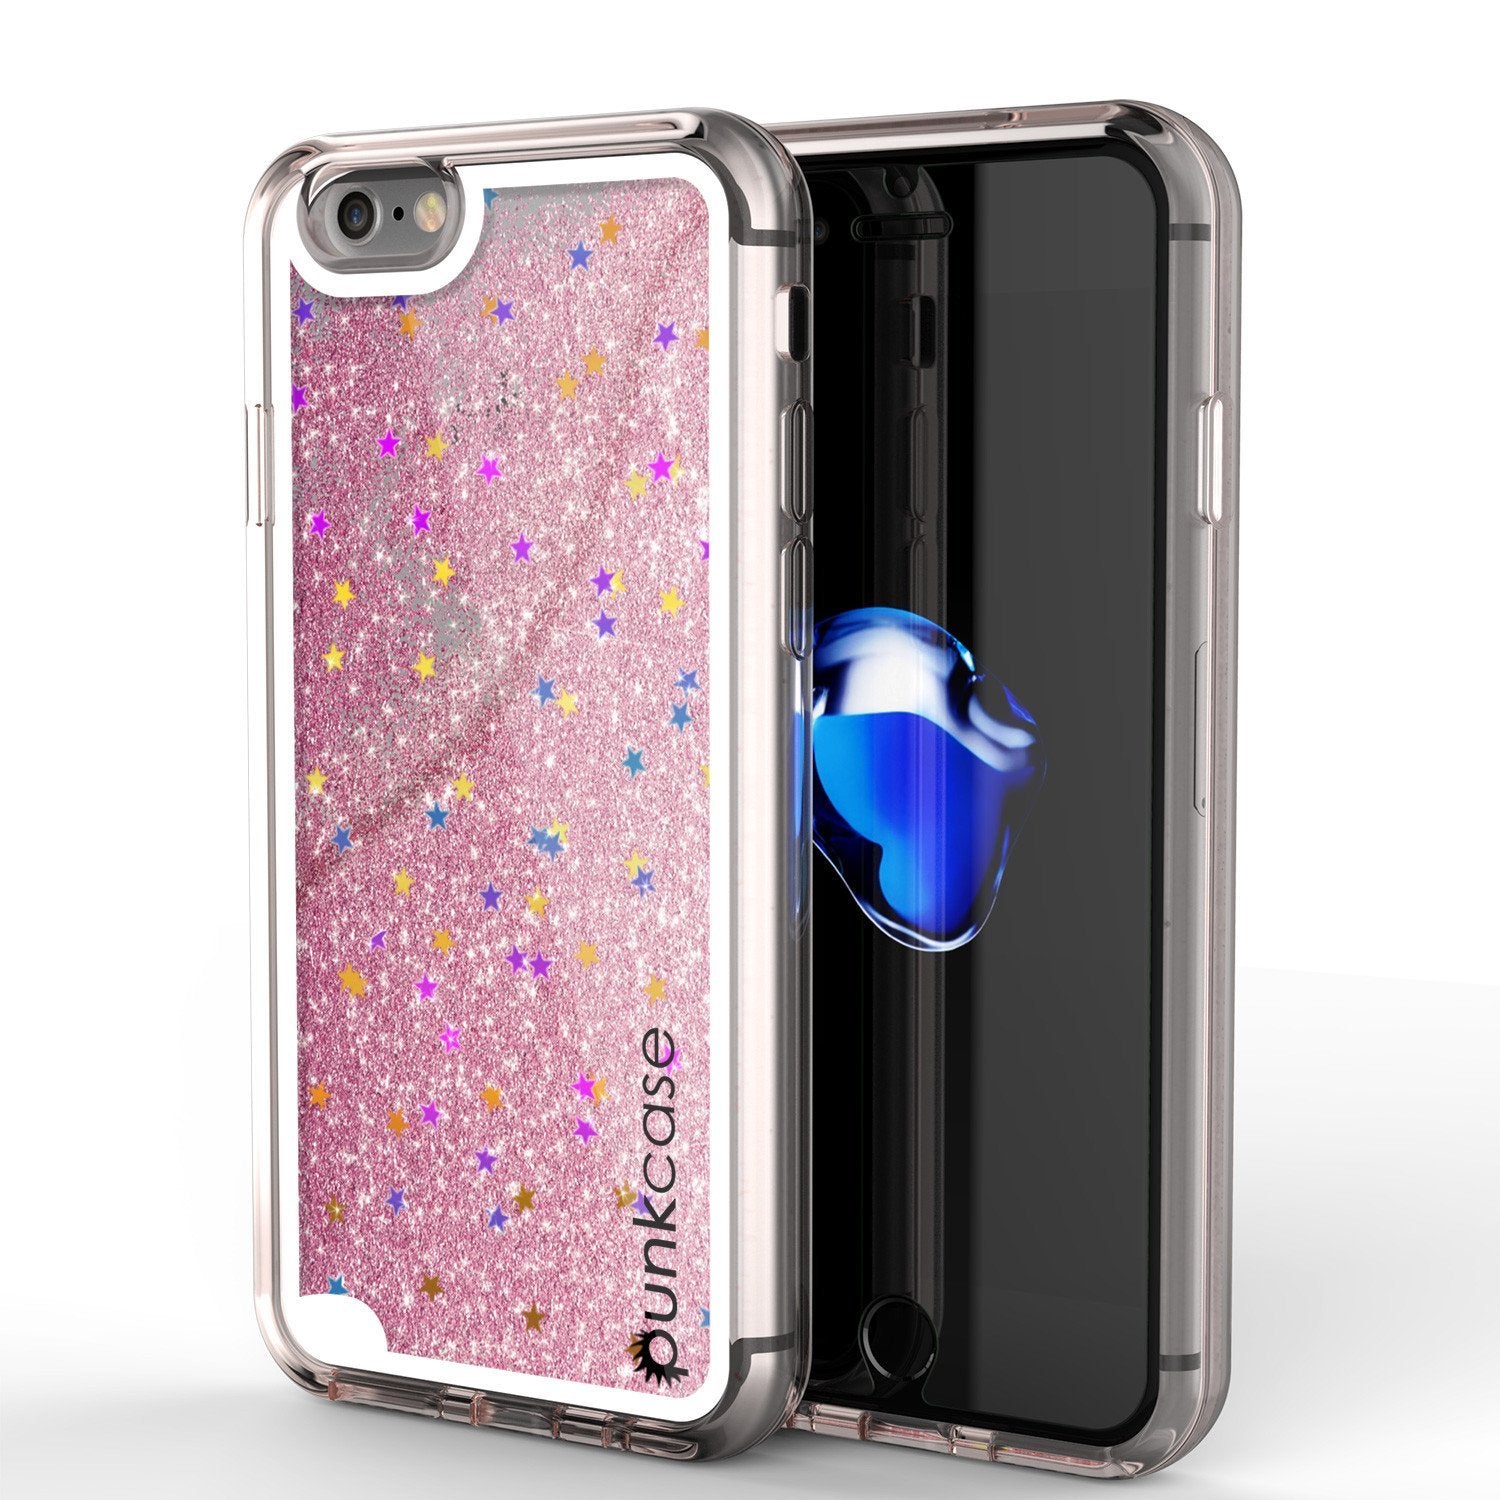 iPhone 8 Case, PunkCase LIQUID Rose Series, Protective Dual Layer Floating Glitter Cover (Color in image: rose)